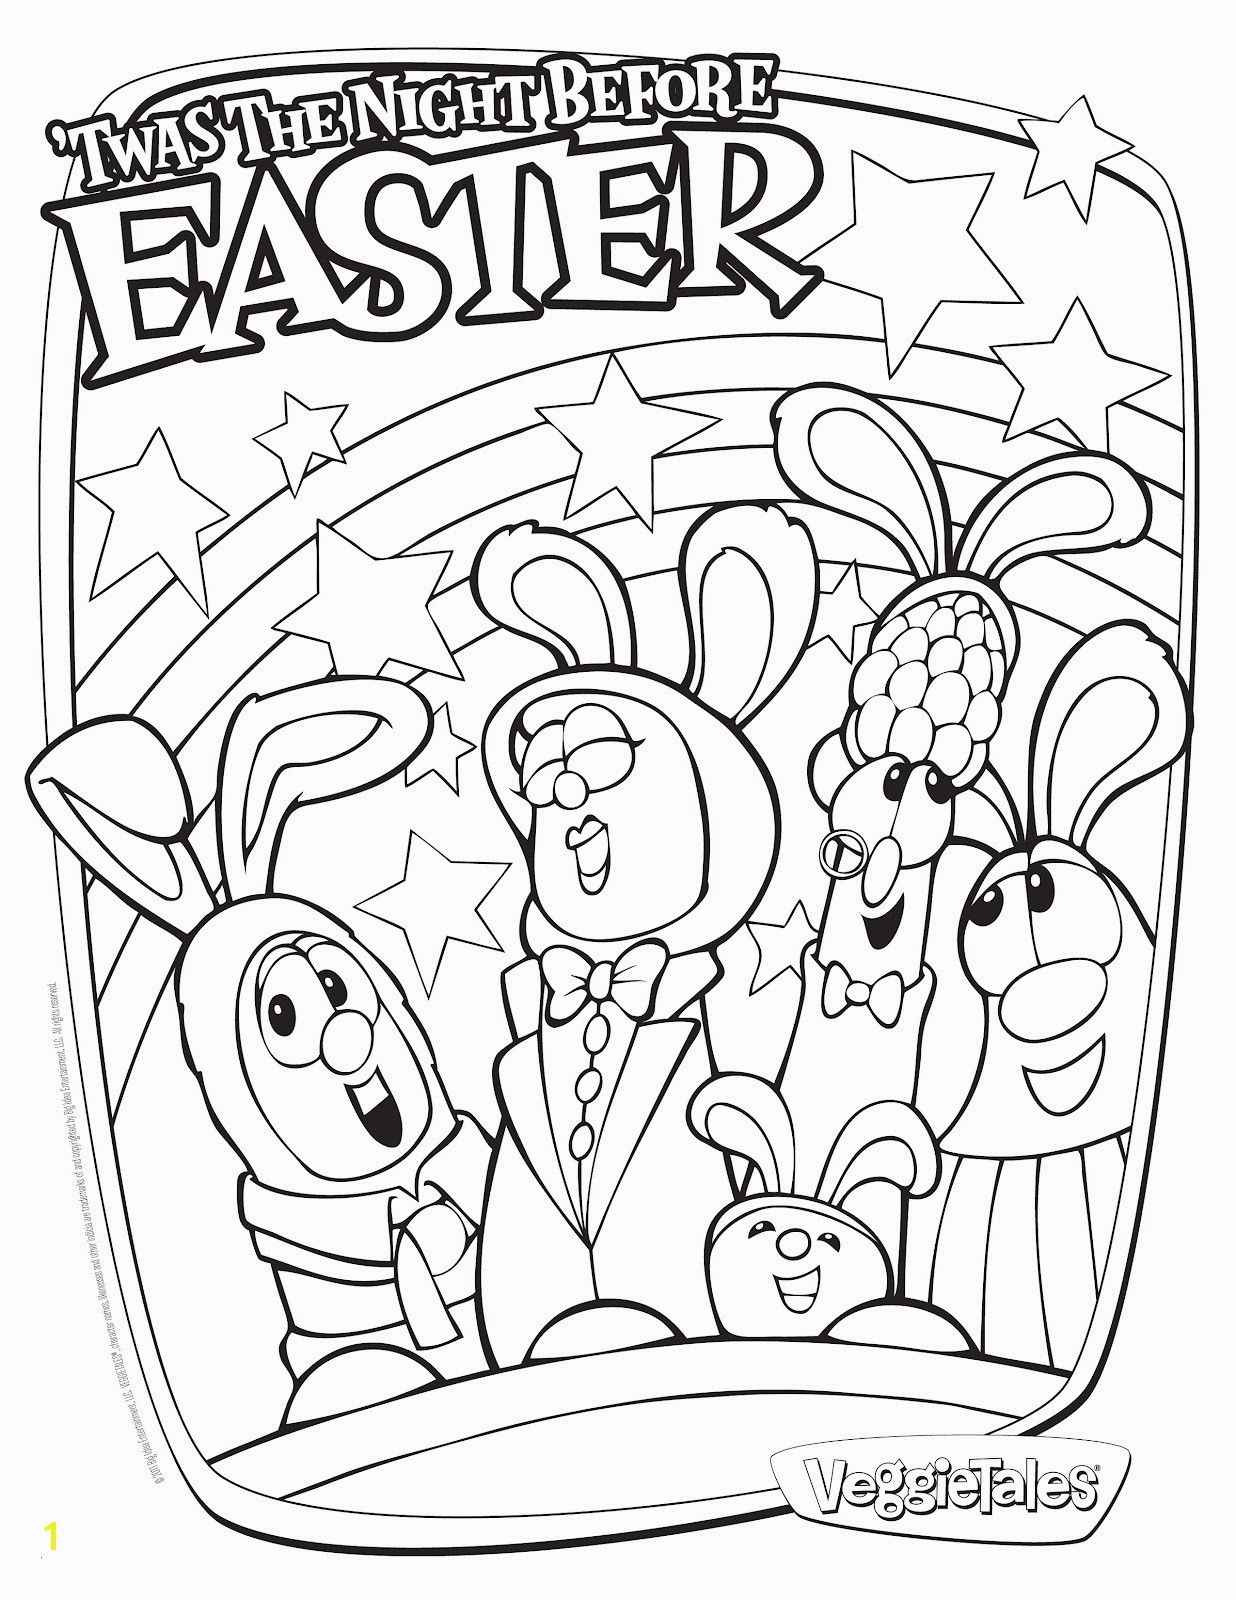 Jesus with Child Coloring Page Jesus with Children Coloring Pages Coloring Pages Jesus Amazing